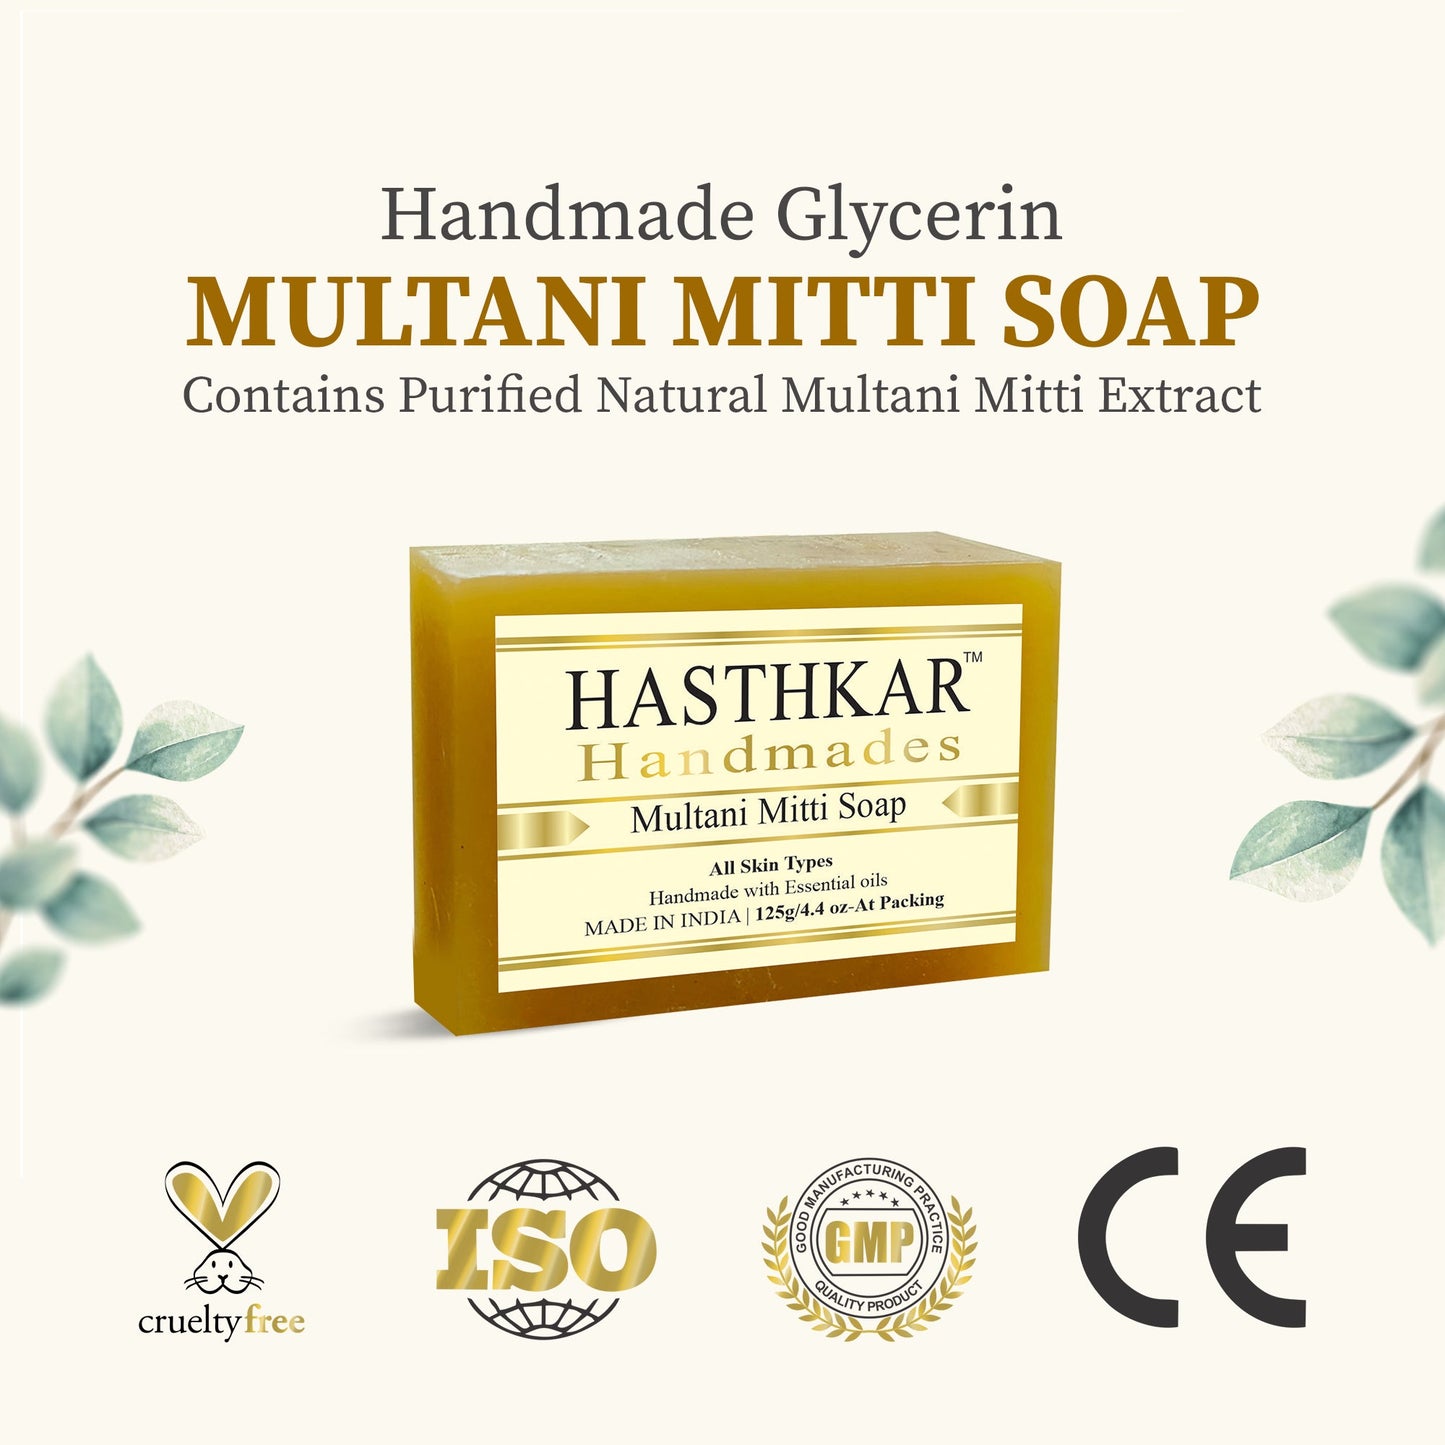 Hasthkar Handmades Glycerine Multan Mitt Soap For Fight Acne And Pimples| Removes Excess Sebum And Oil| Evens Out Skin Tone And Brightens Complexion| Treats Tanning And Pigmentation - 125Gm